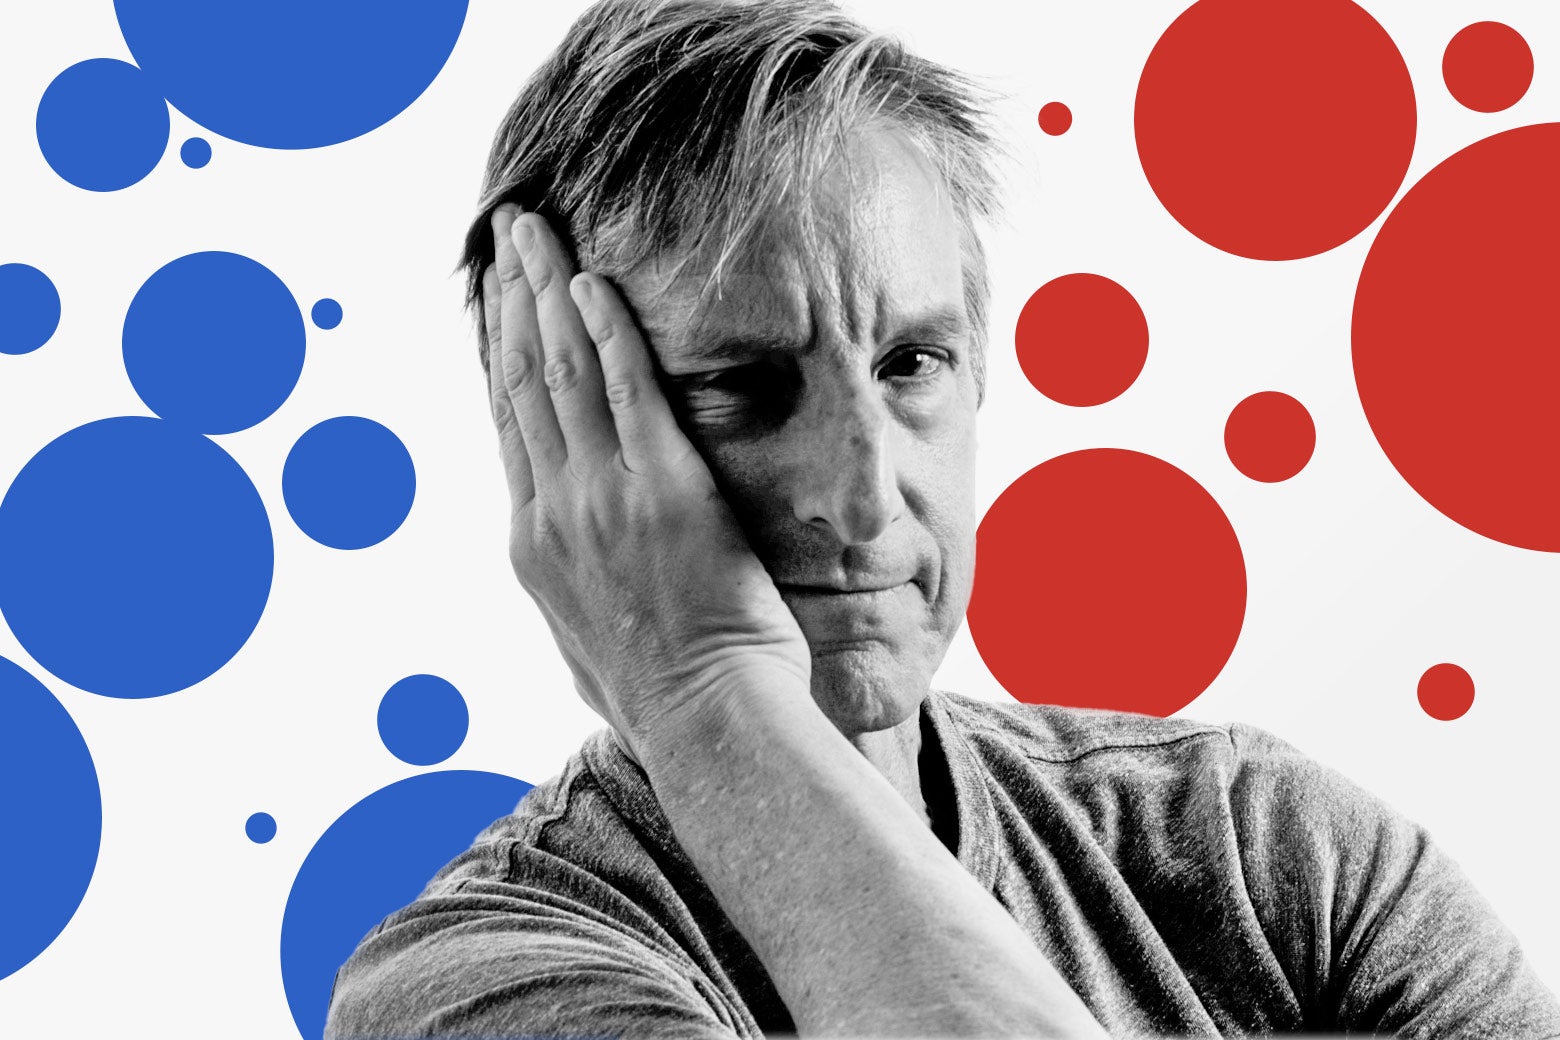 A white man puts his hand to his face against a backdrop of red and blue polka dots.